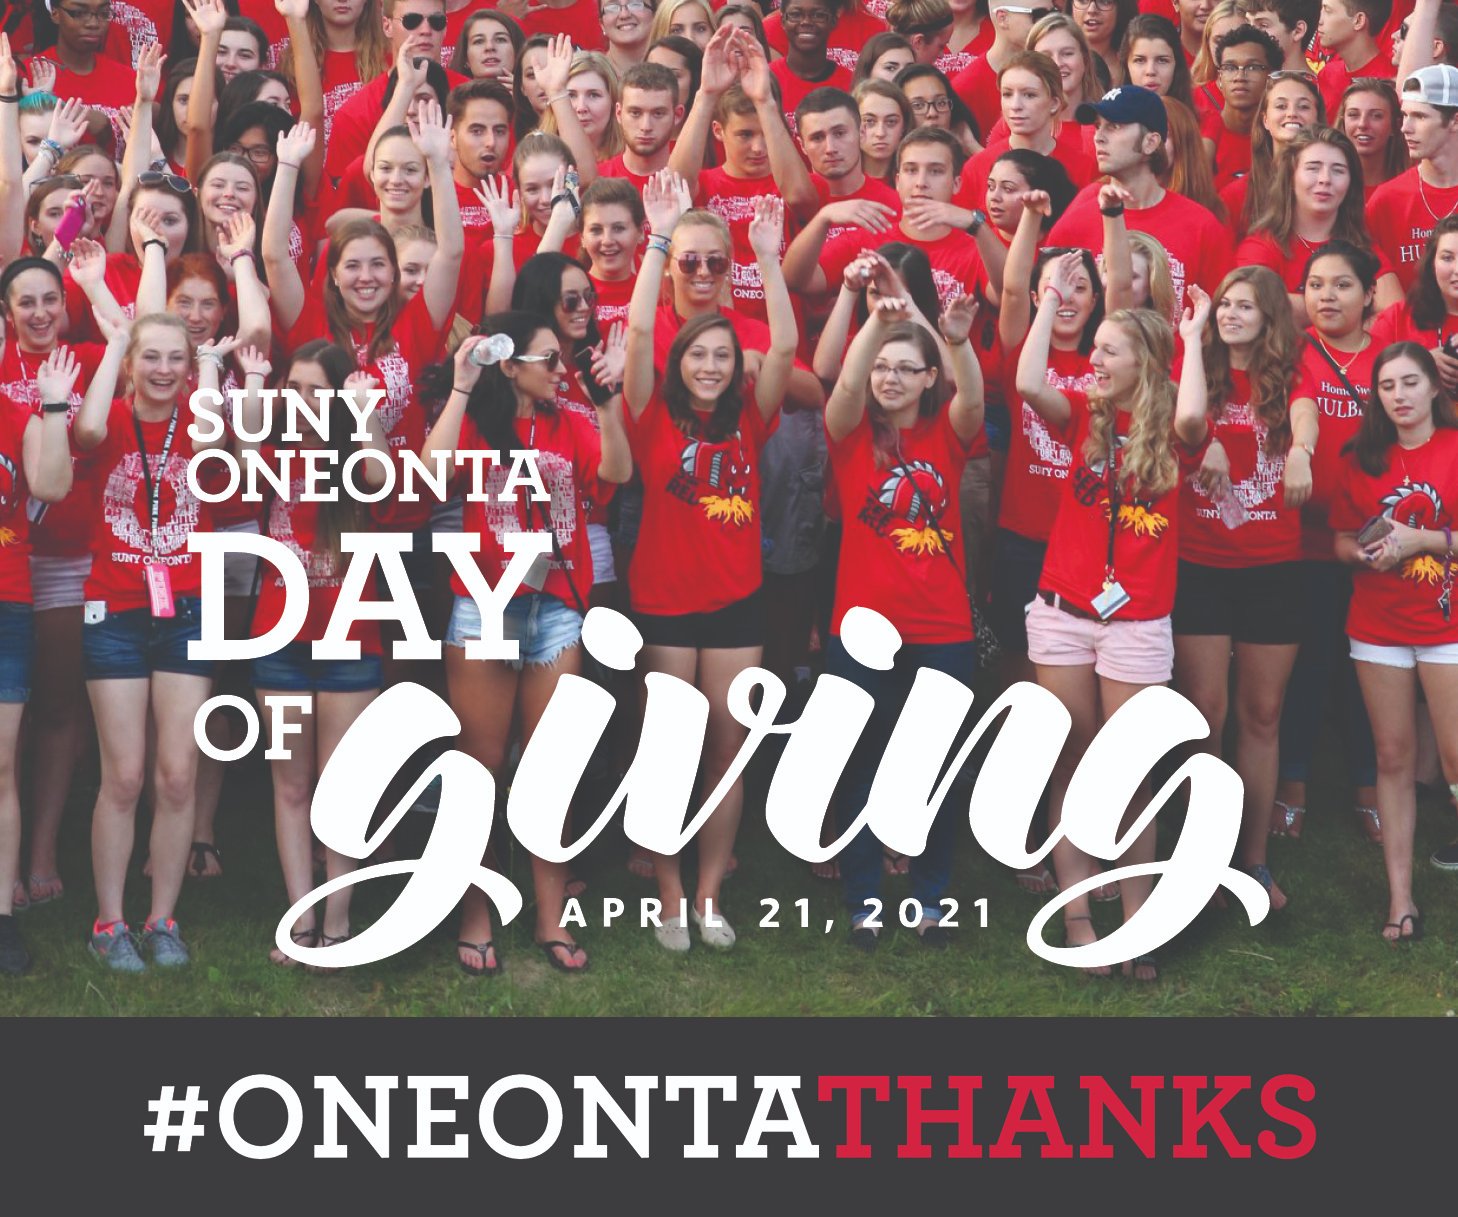 SUNY Oneonta Alumni on Twitter "SUNY Oneonta’s annual Day of Giving is